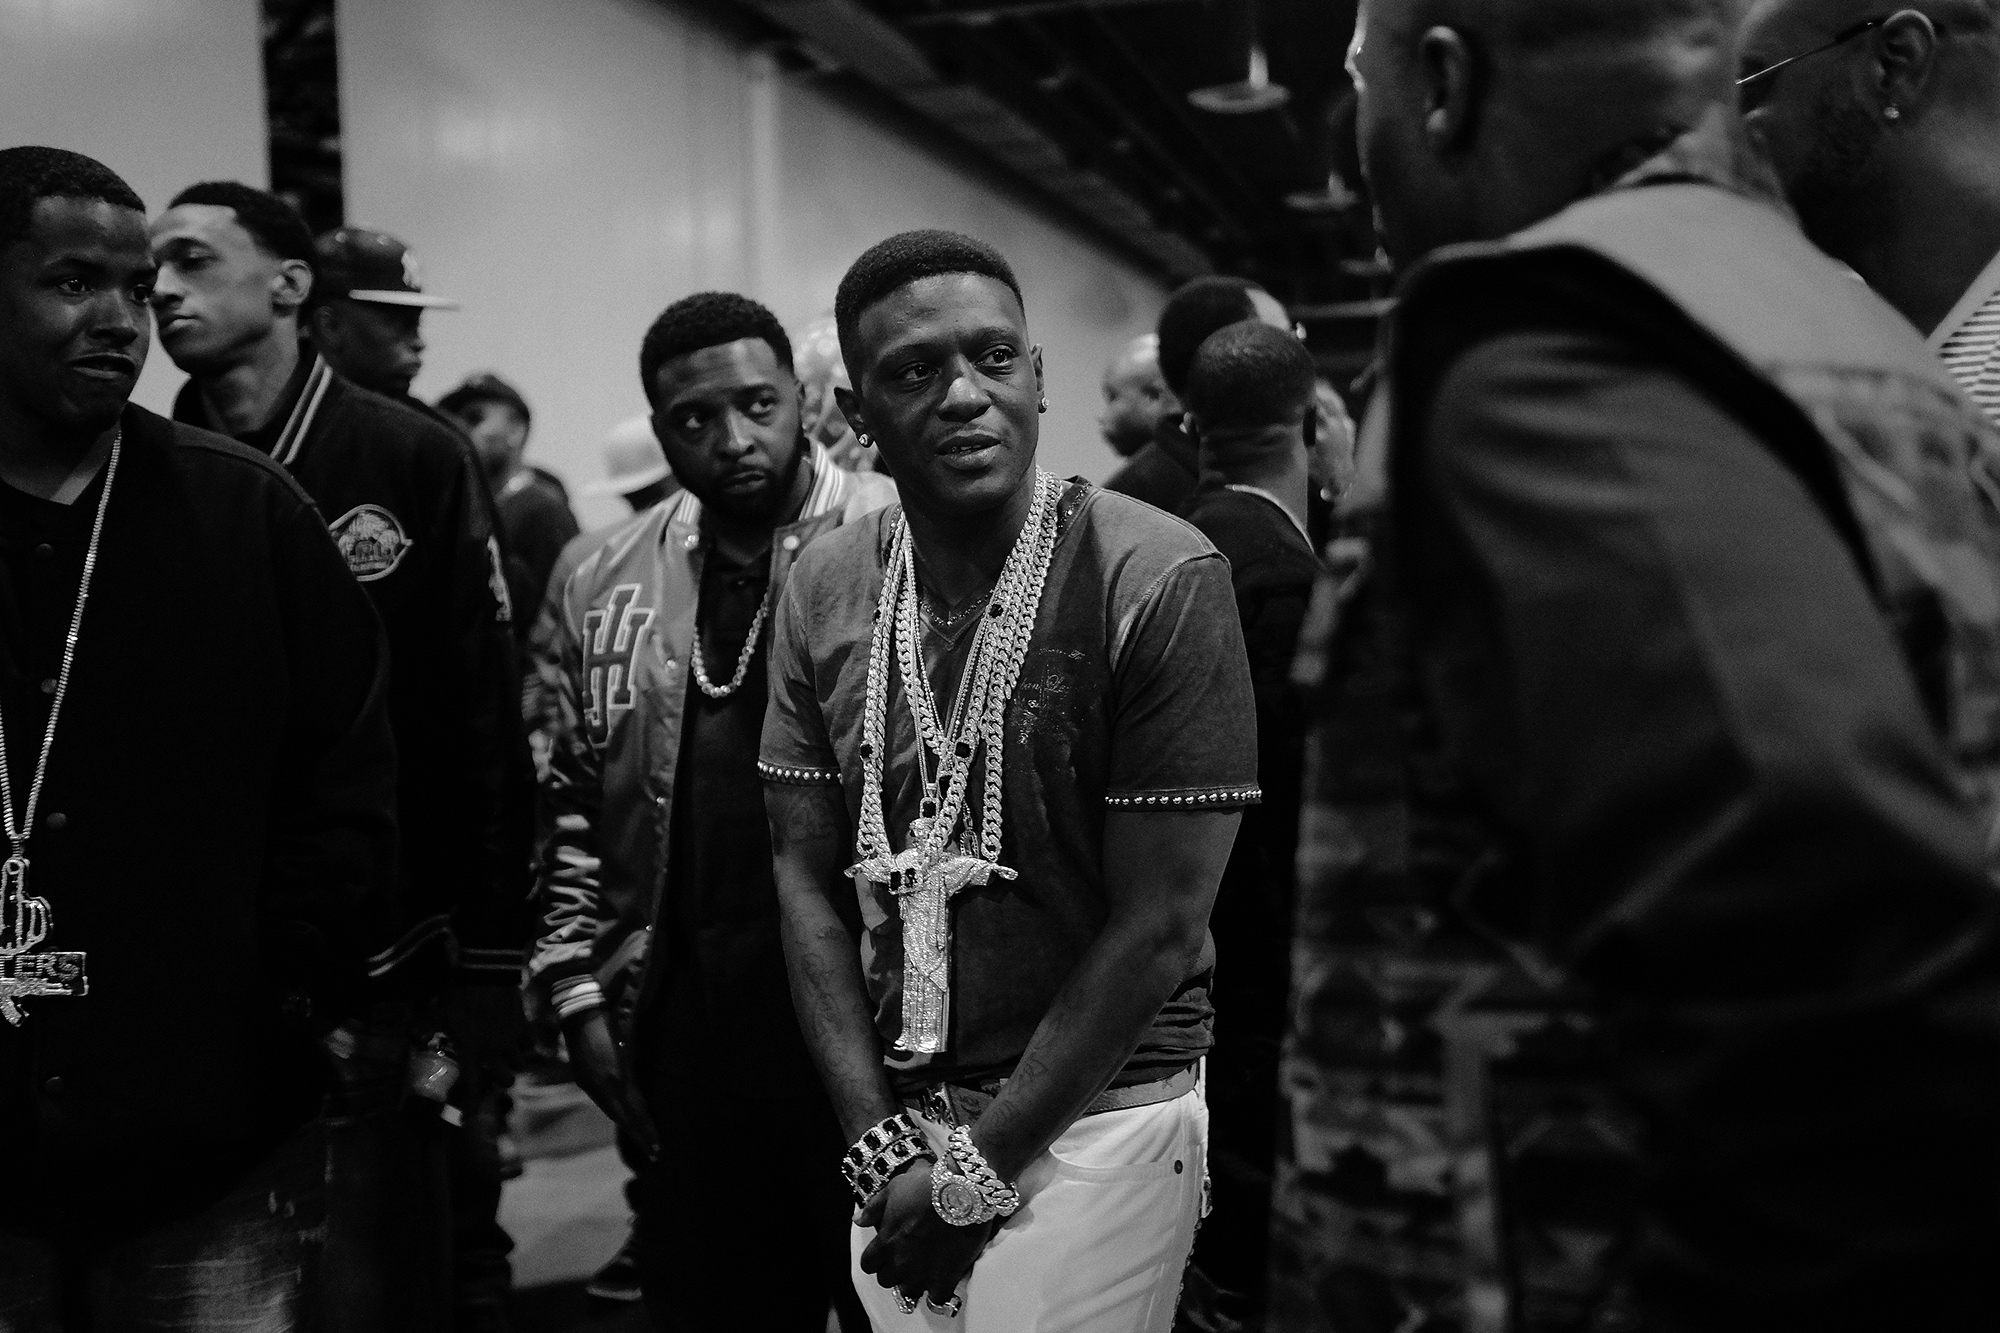 Lil Boosie and Willie D of the Geto Boys, rappers, meet backstage during the Dub car show and concert, photographed by Houston editorial and commercial photographer, Todd Spoth.